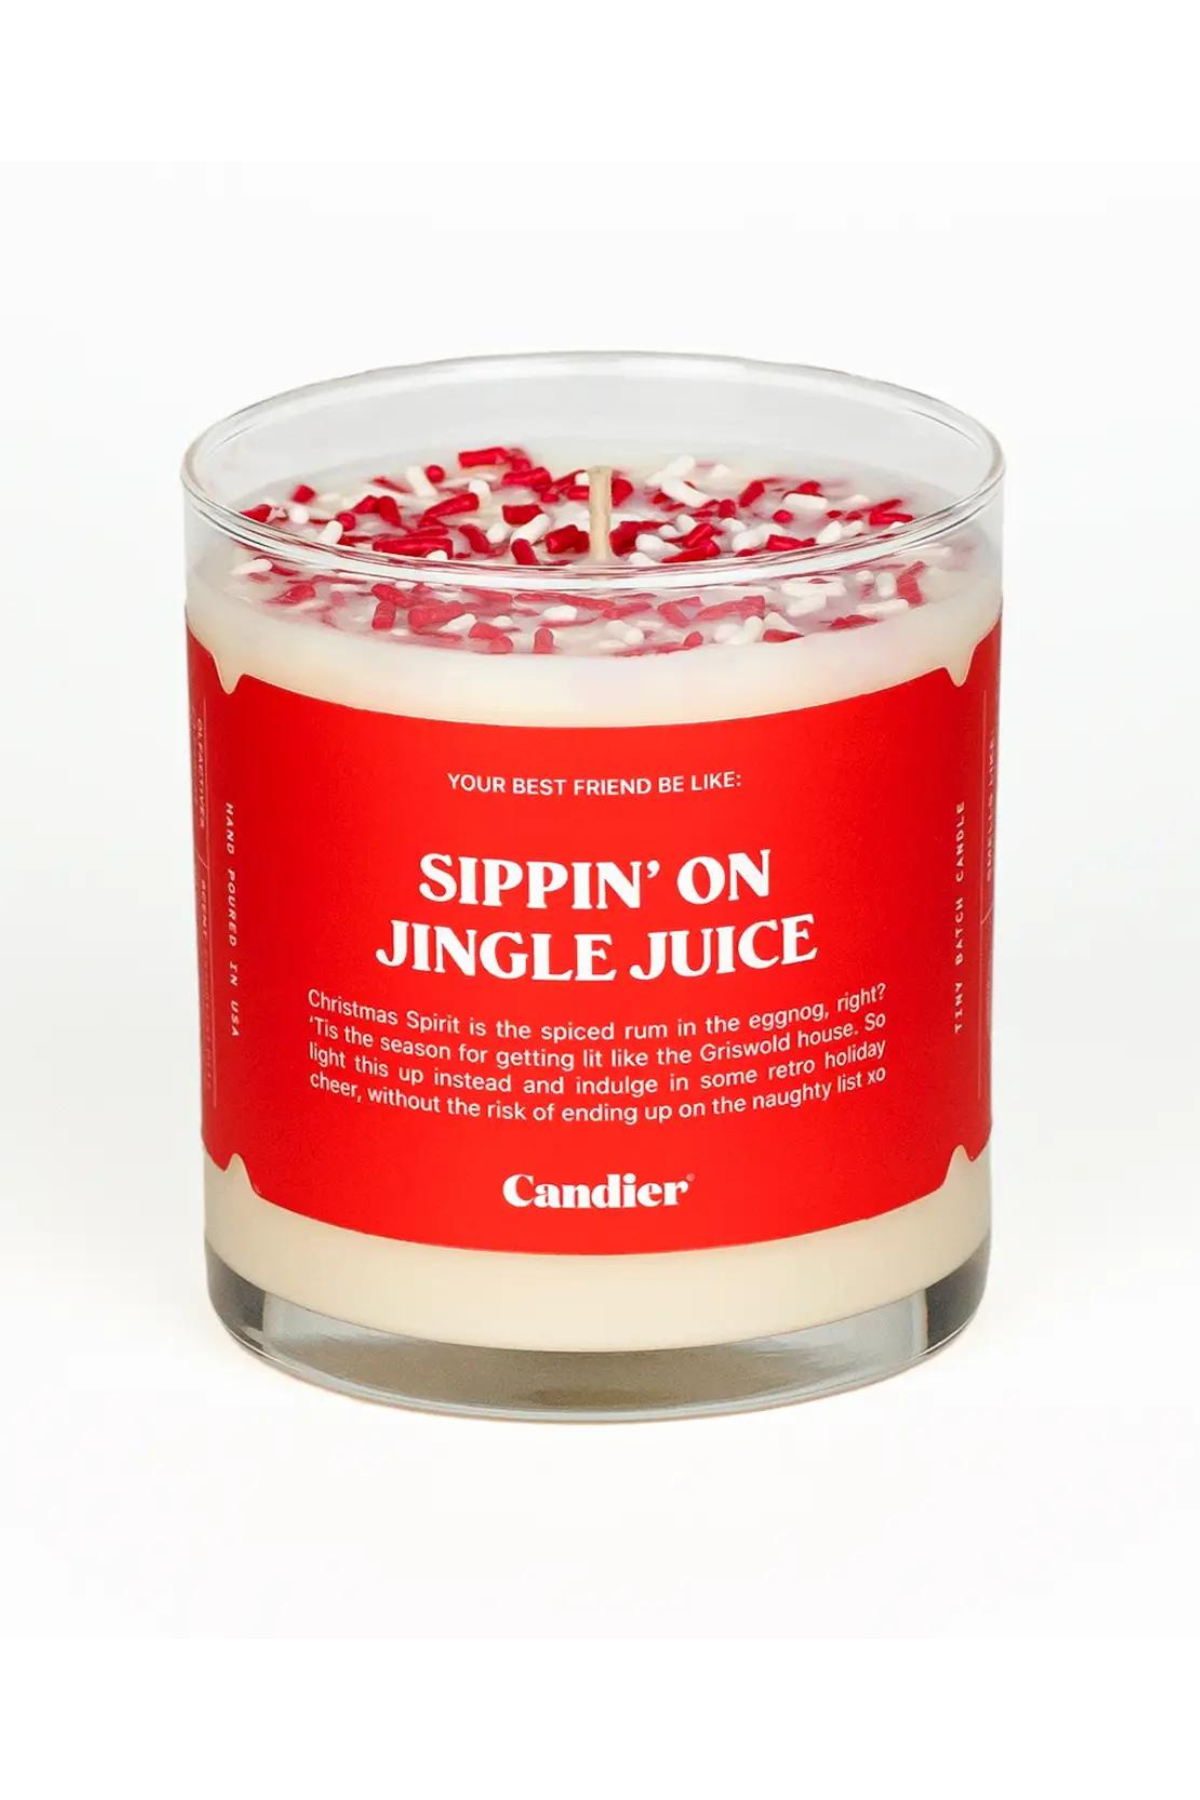 Candier Sippin’ On Jingle Juice Candle